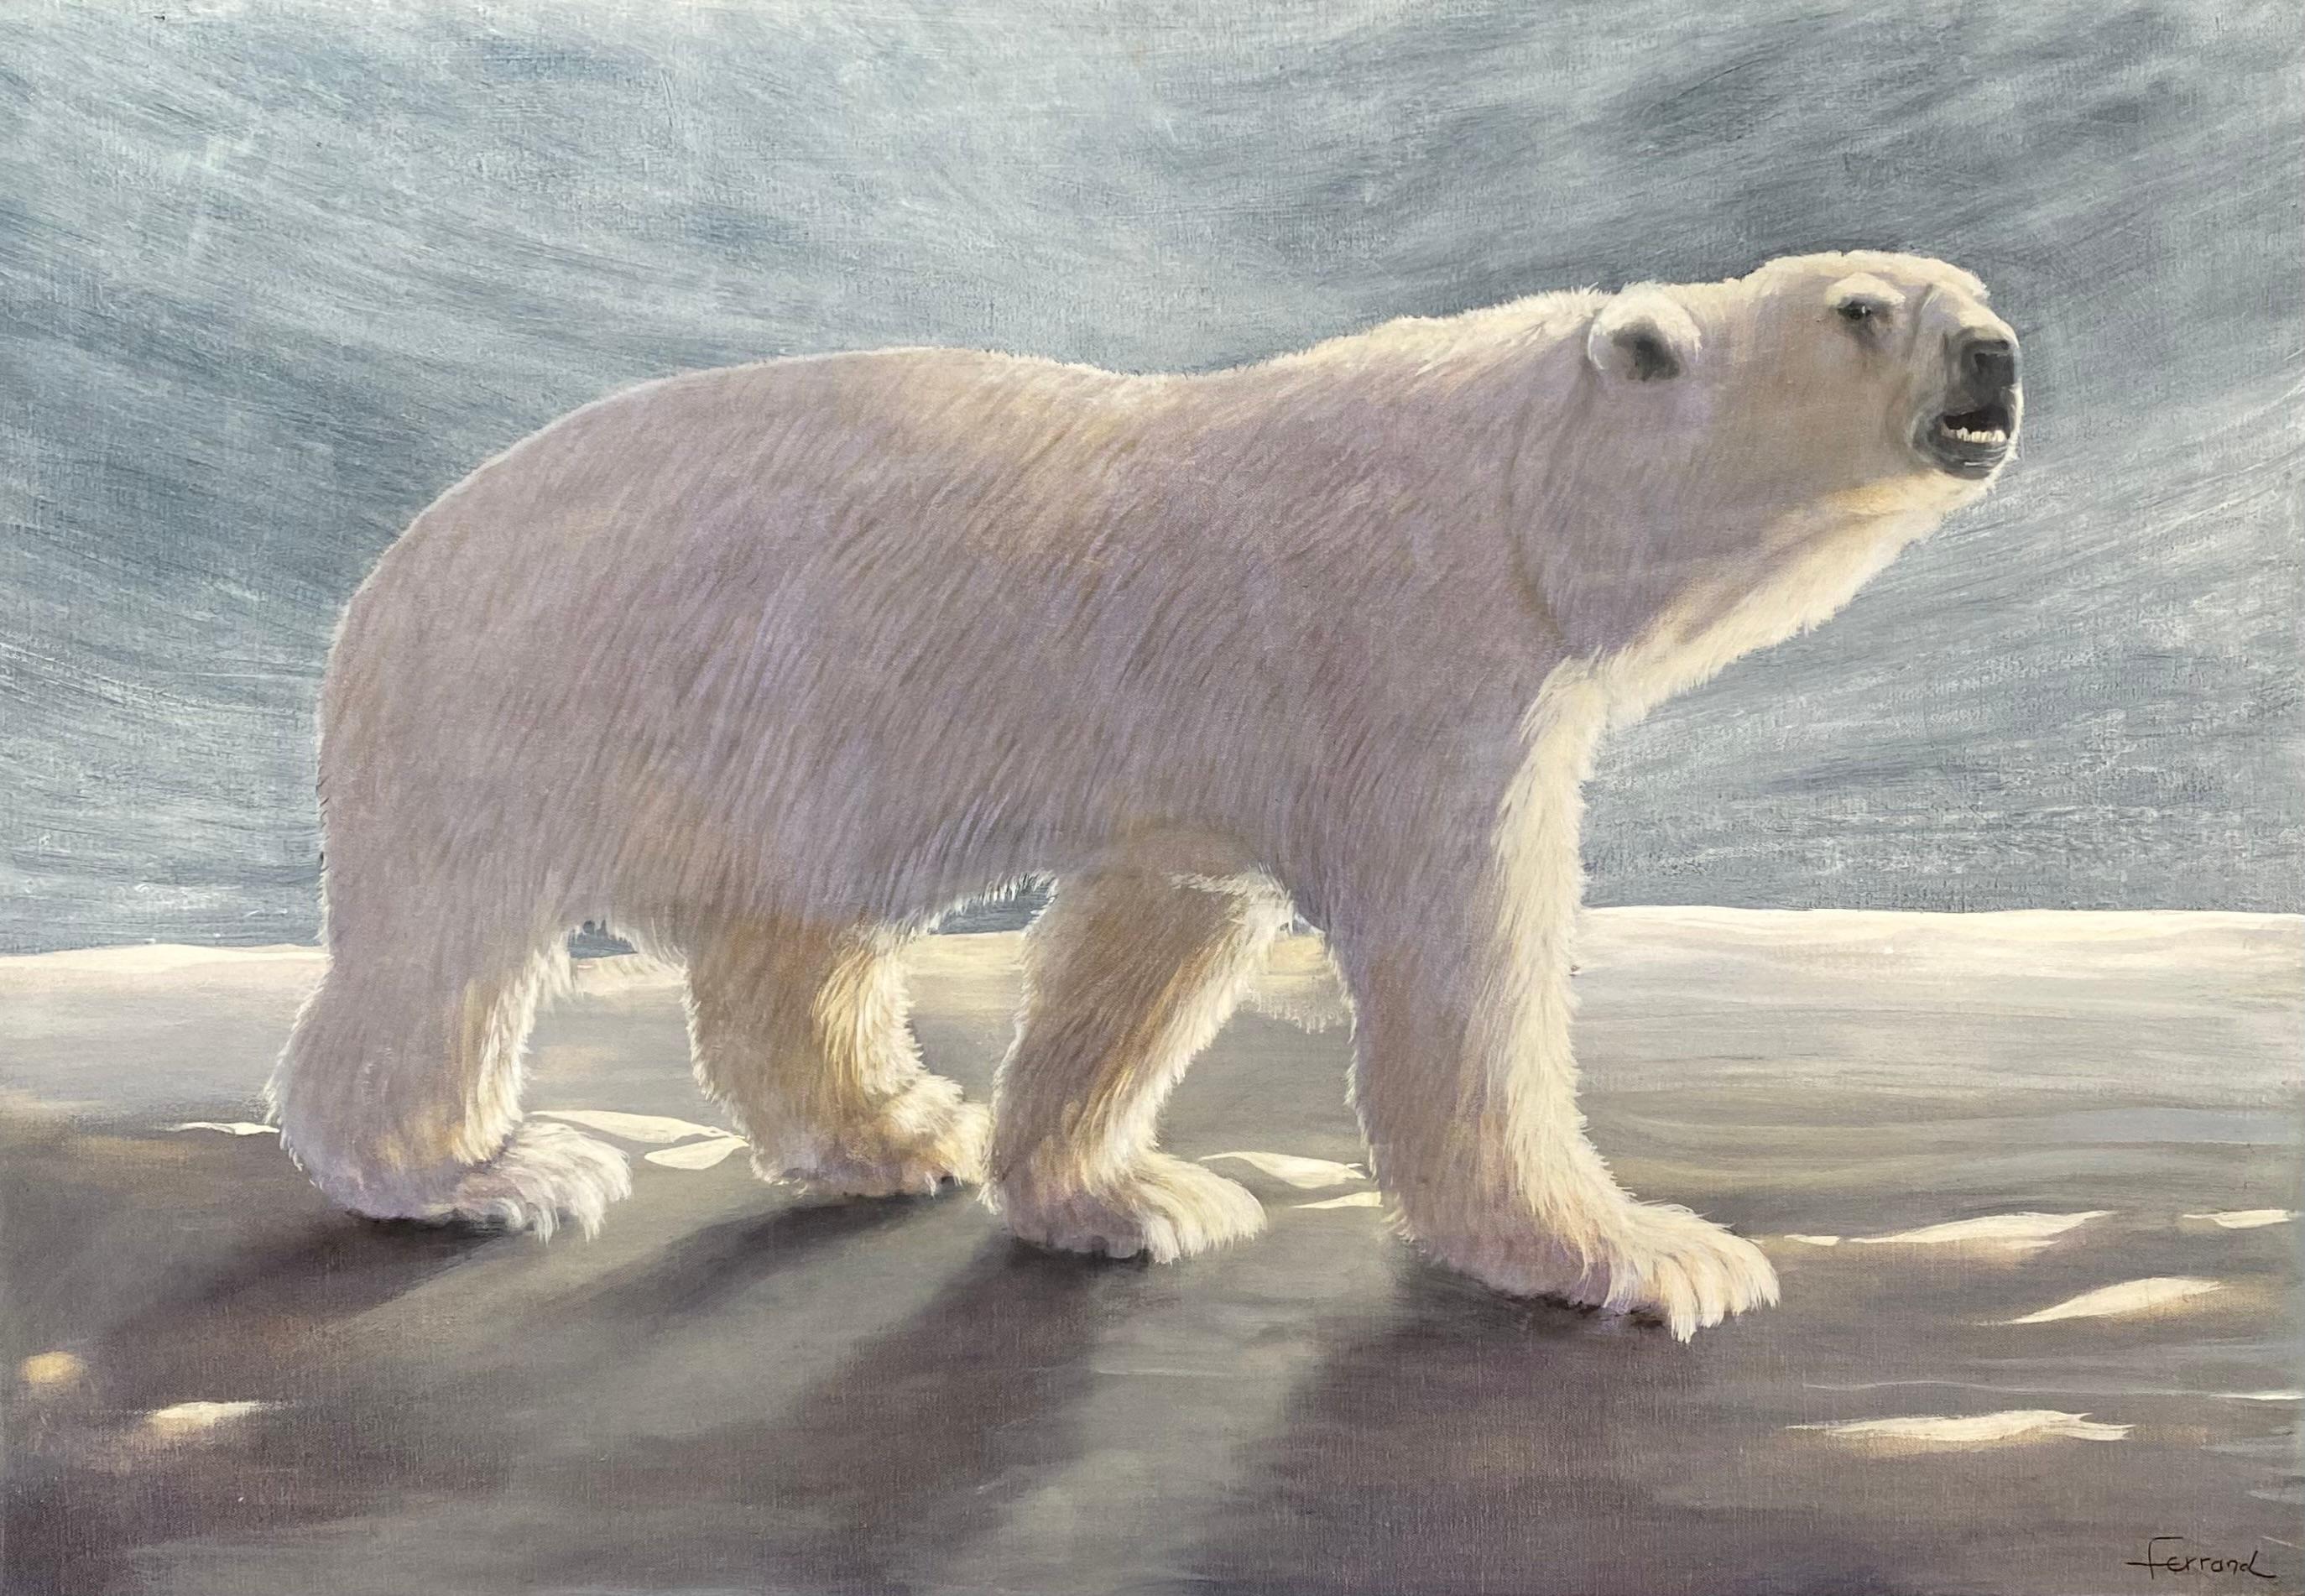 André Ferrand - "The Bear on the ice floe"
Signed lower right
Signed, dated on the back
Oil on canvas / wooden frame
Dimensions: 116x82x2cm
2004